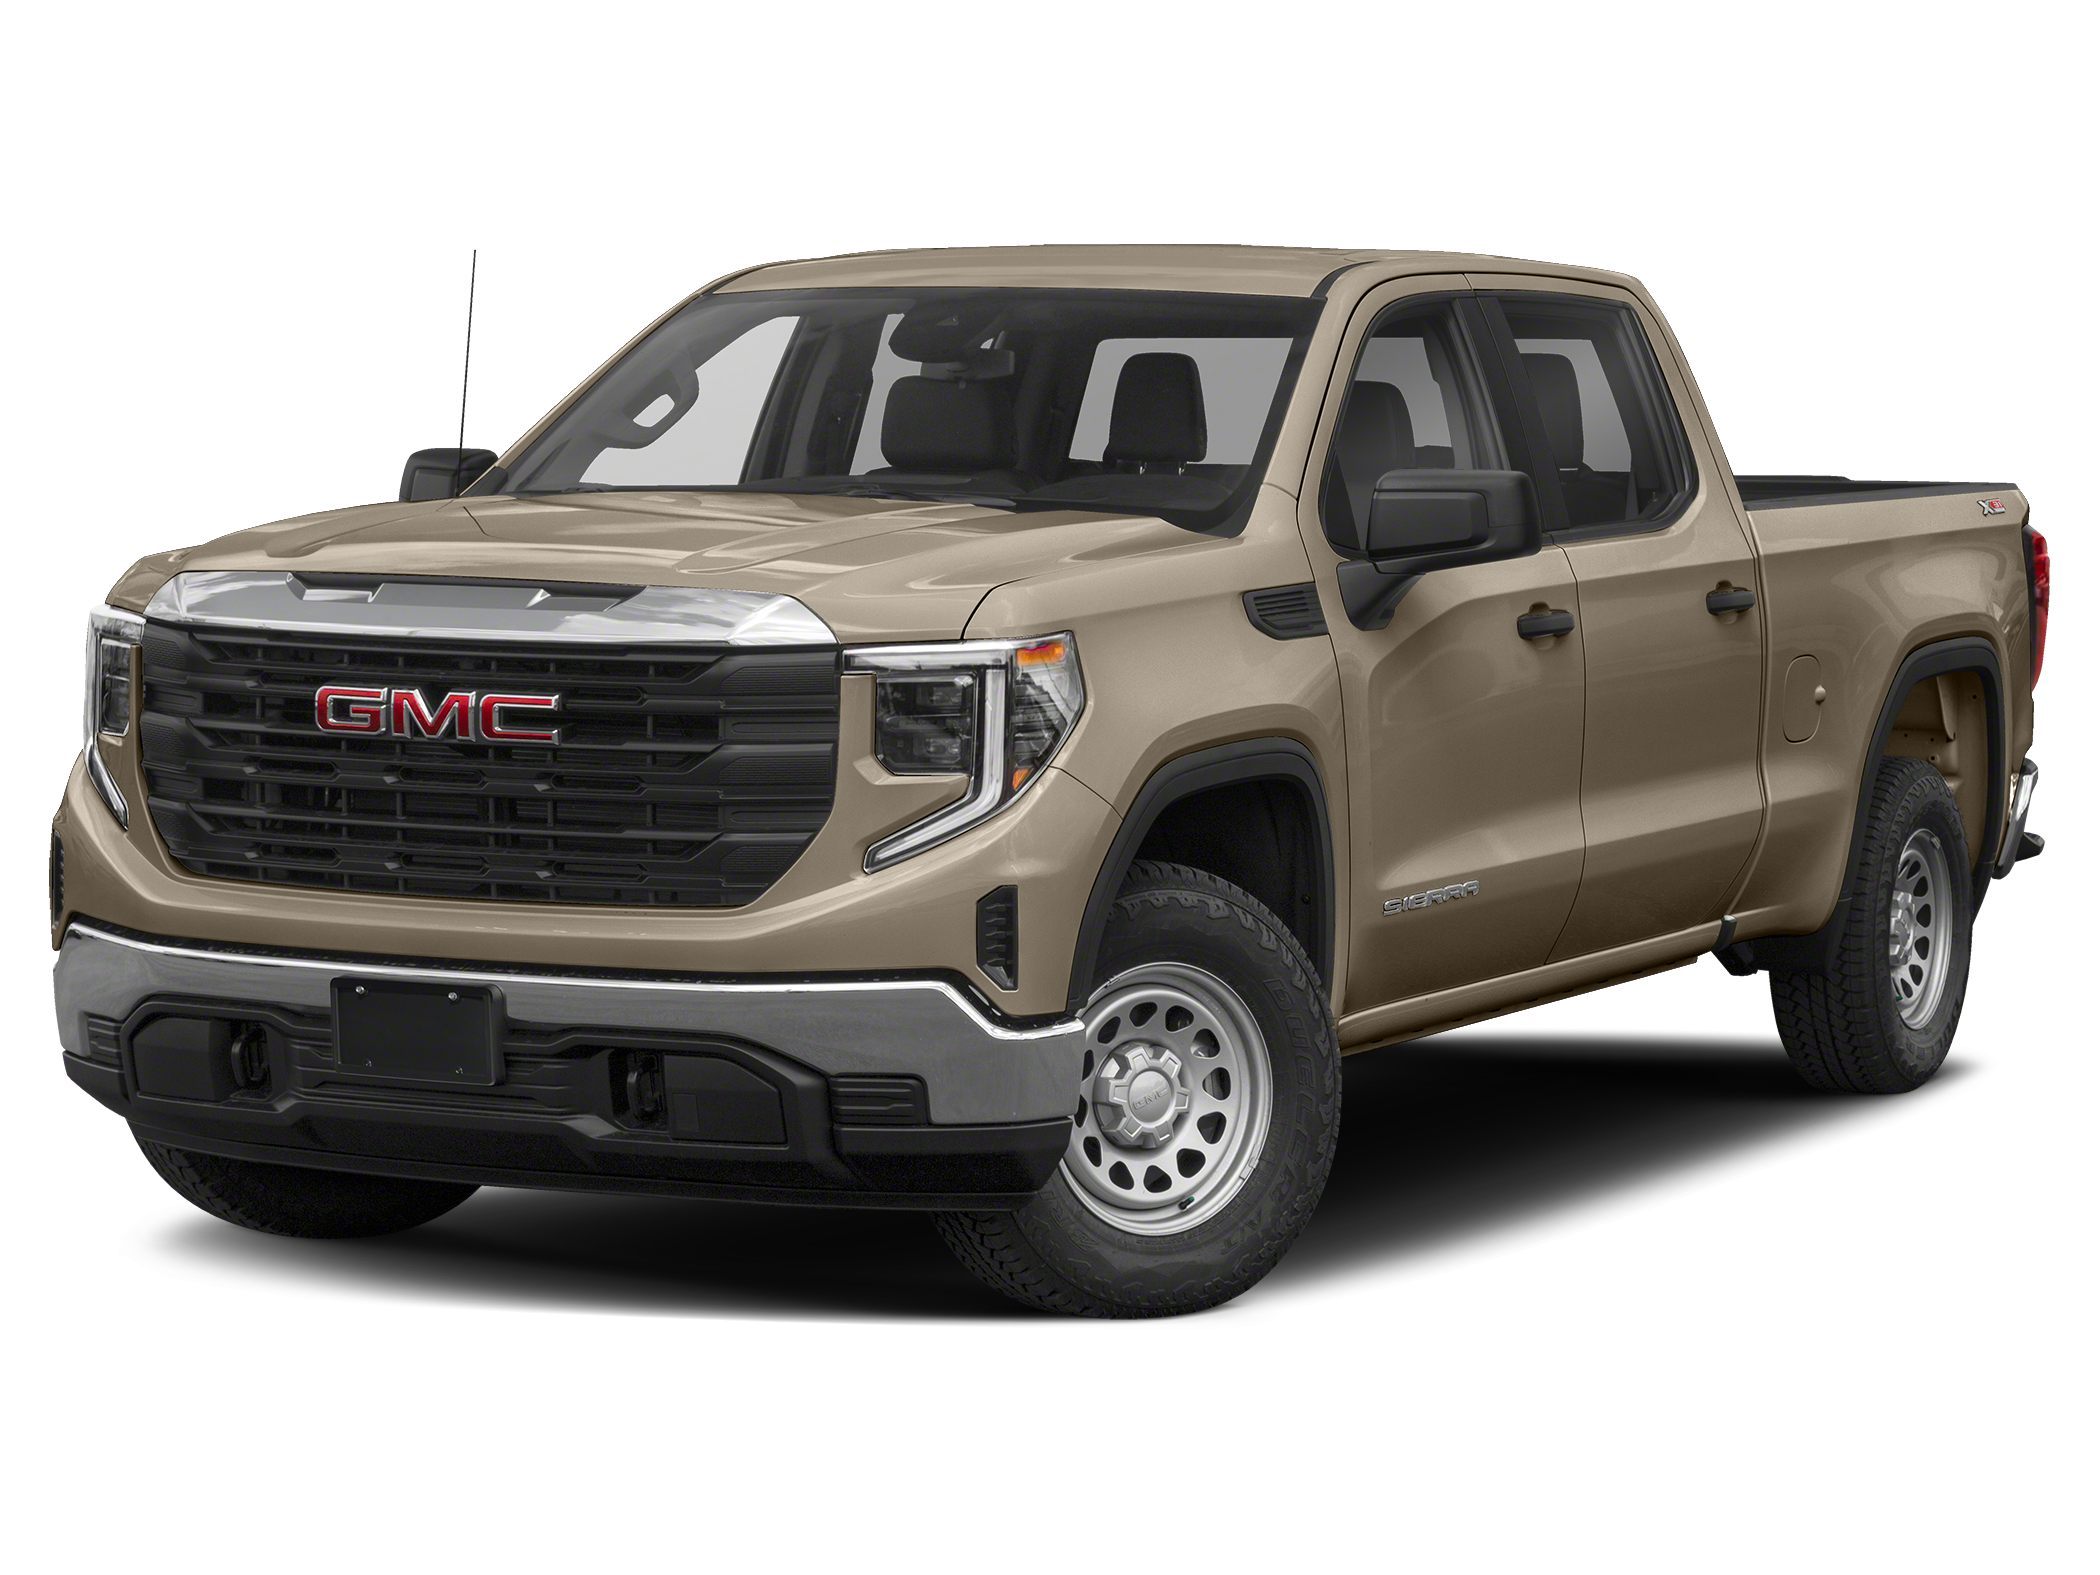 Used 2022 GMC Sierra 1500 For Sale at Kia of Stockton | VIN:  3GTPUEEL6NG561924